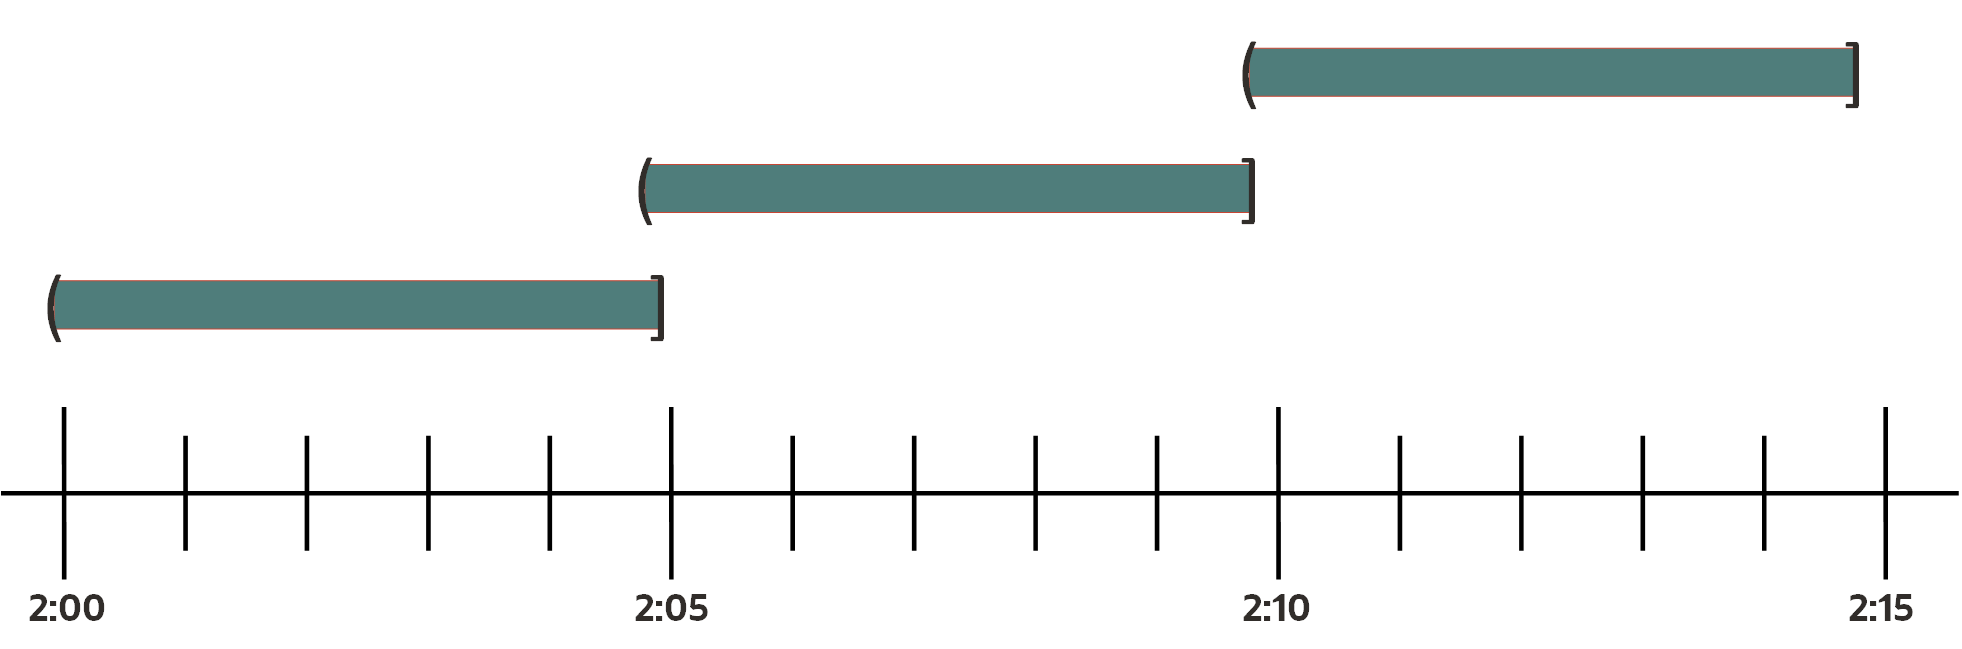 This image shows how the timestamp of an aggregated data point corresponds to the interval.